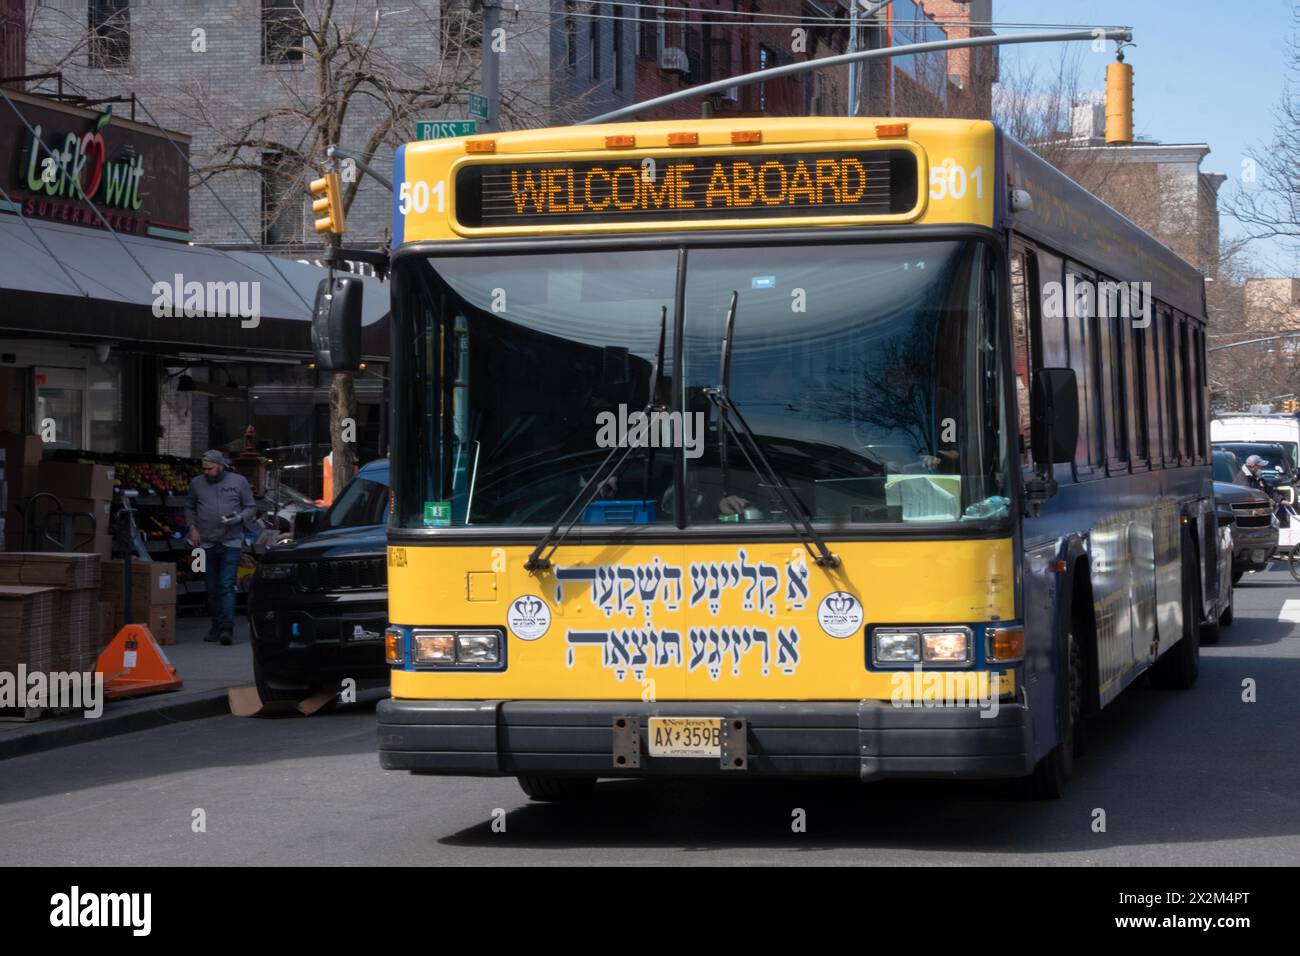 A private bus that runs between the orthodox Jewish neighborhoods of Williamsburg & Boro Park. On Lee Avenue & with Yiddish writing on the front. Stock Photo